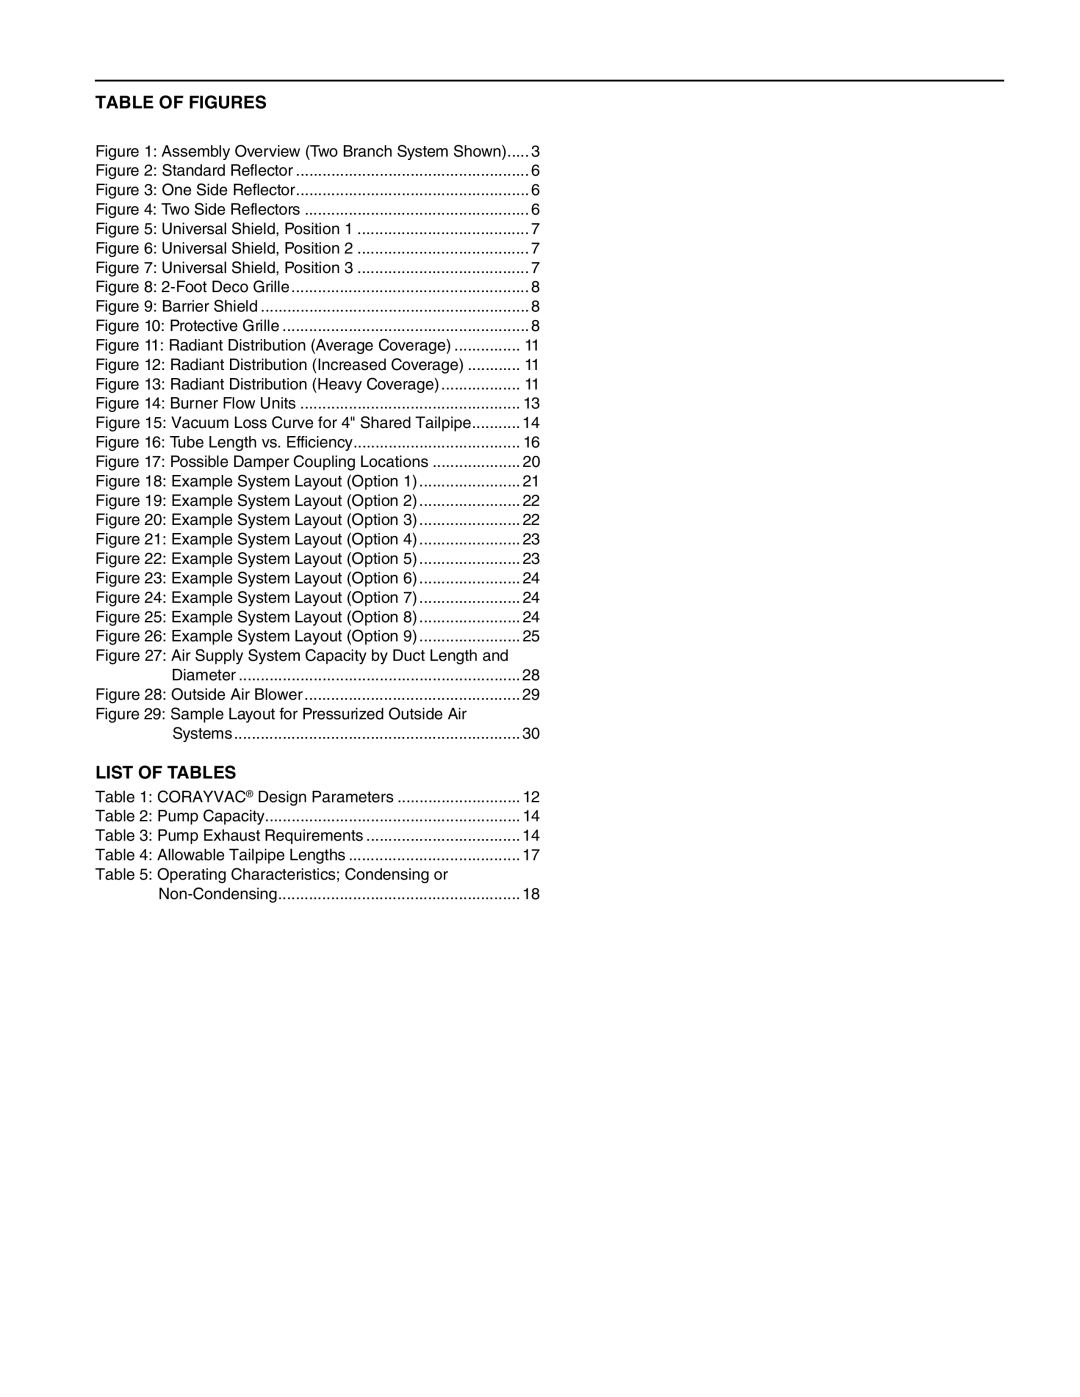 Roberts Gorden CRV-B-9 service manual Table Of Figures, List Of Tables 